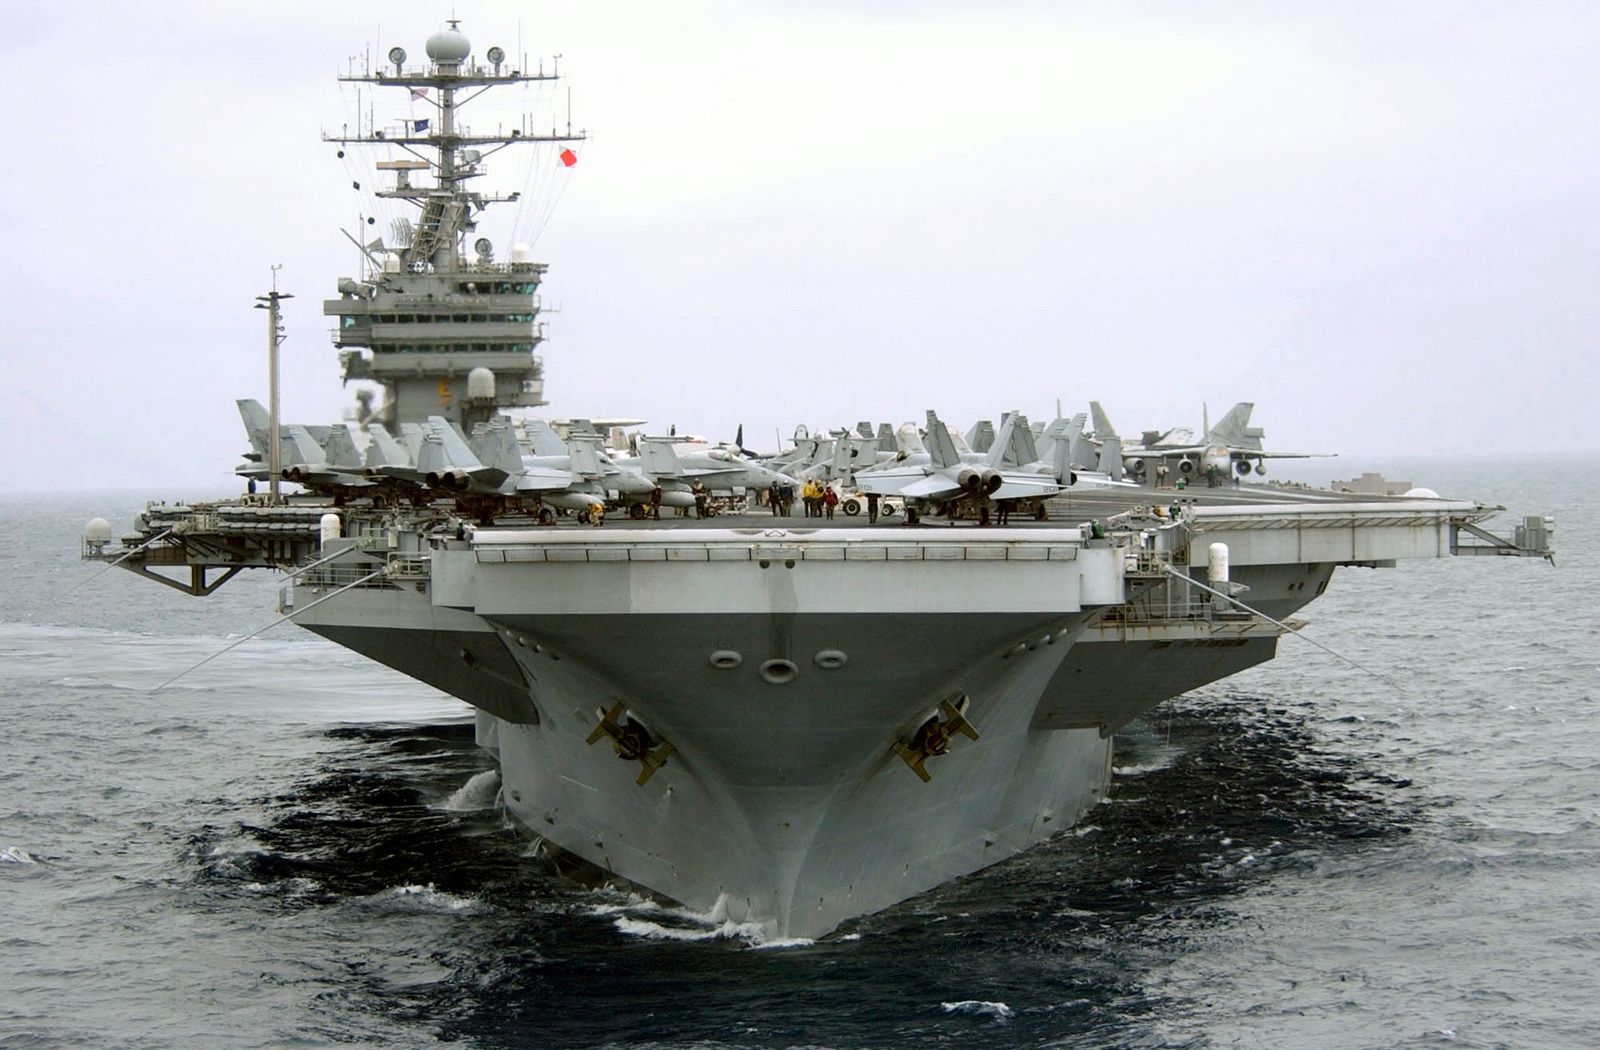 bow-on-view-of-the-us-navy-usn-nimitz-class-aircraft-carrier-uss-john-c-stennis-ea93ce-1600